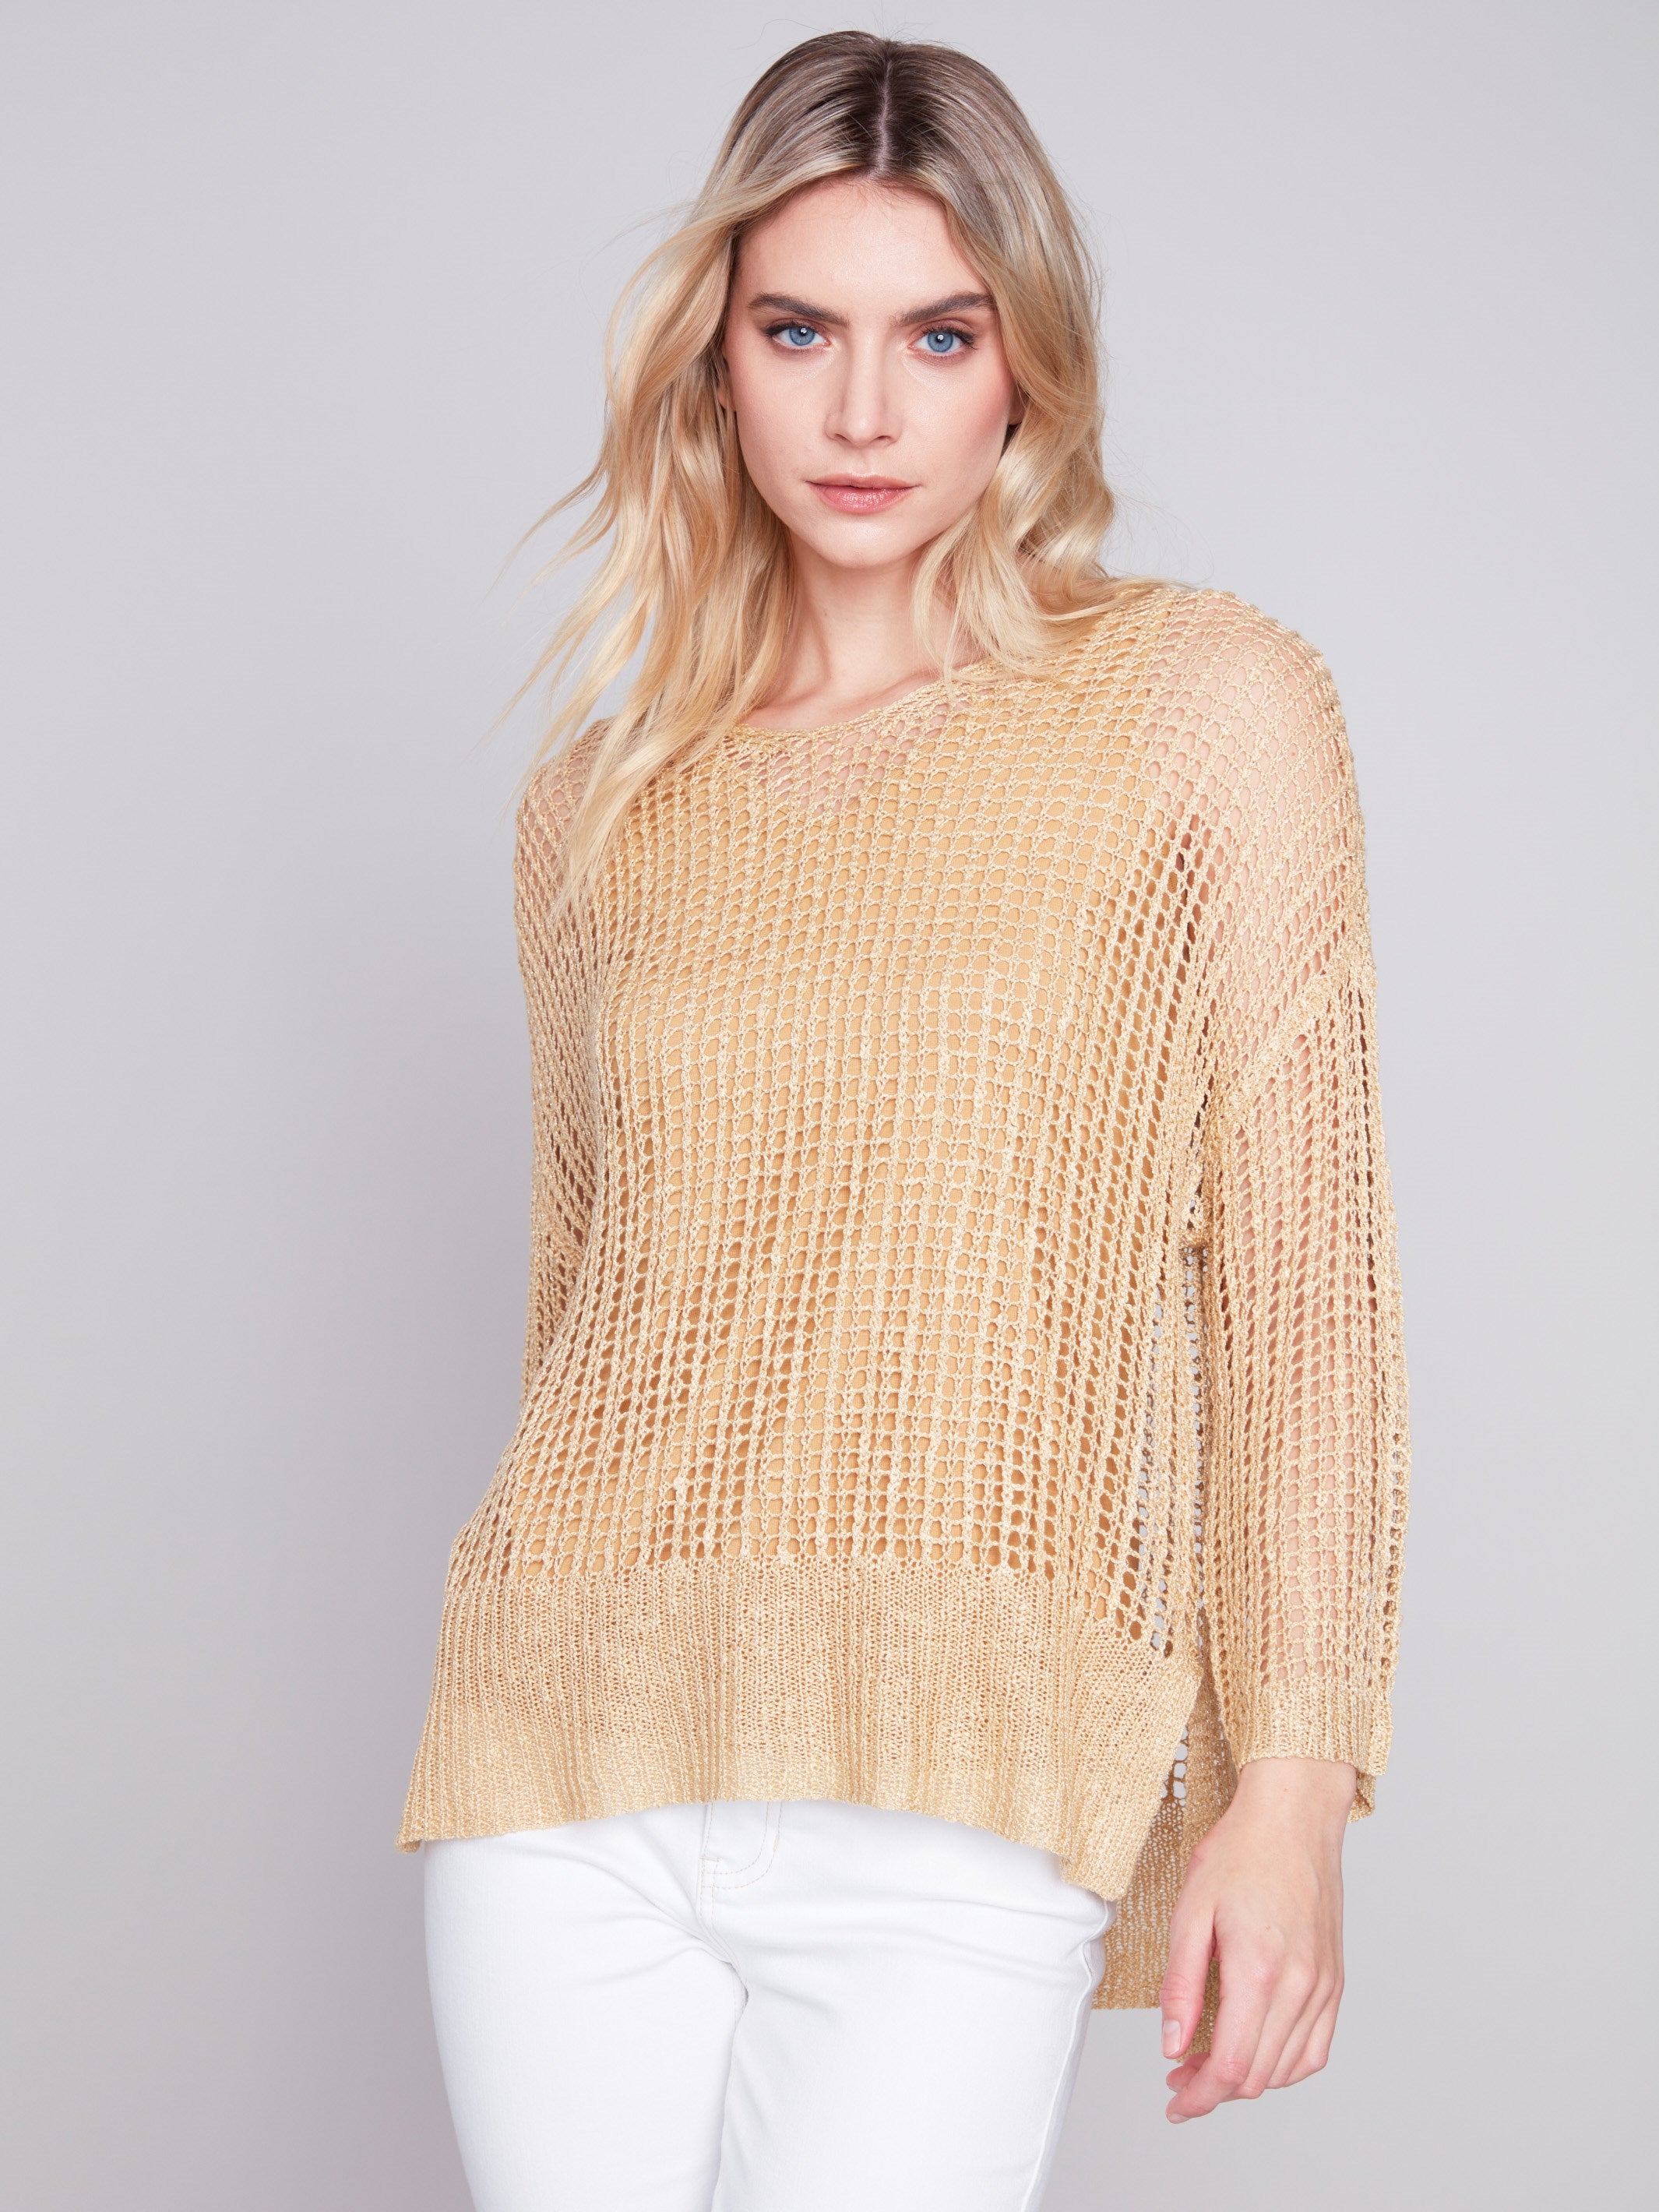 Fishnet Crochet Sweater - Gold - Charlie B Collection Canada - Image 1